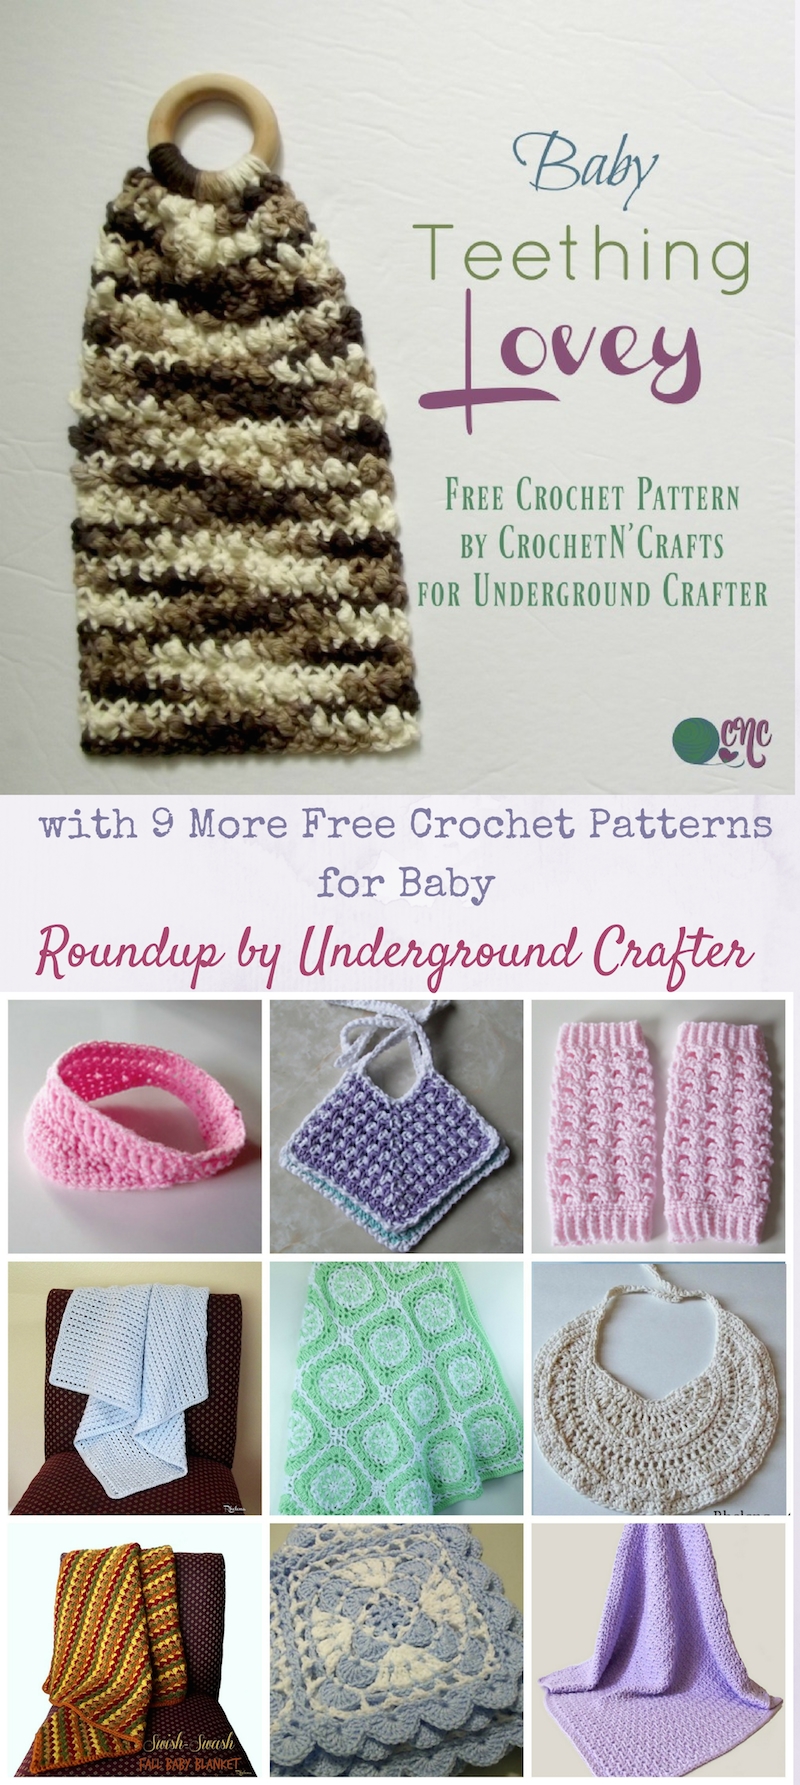 Free crochet pattern: Baby Teething Lovey by CrochetN'Crafts for Underground Crafter | This quick baby project makes a great gift. This post also includes a roundup of 9 more free crochet patterns for baby by CrochetN'Crafts!